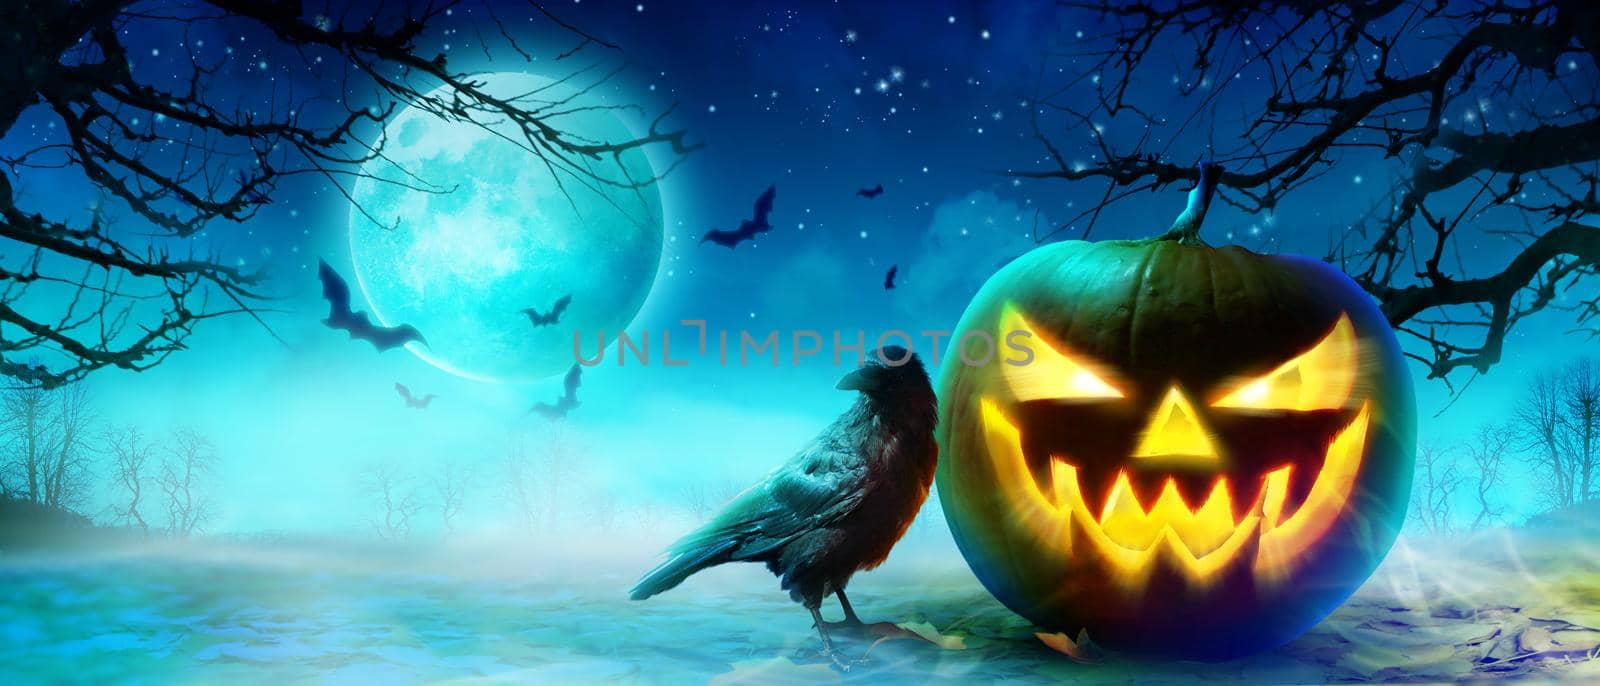 Halloween background with raven in a spooky night.